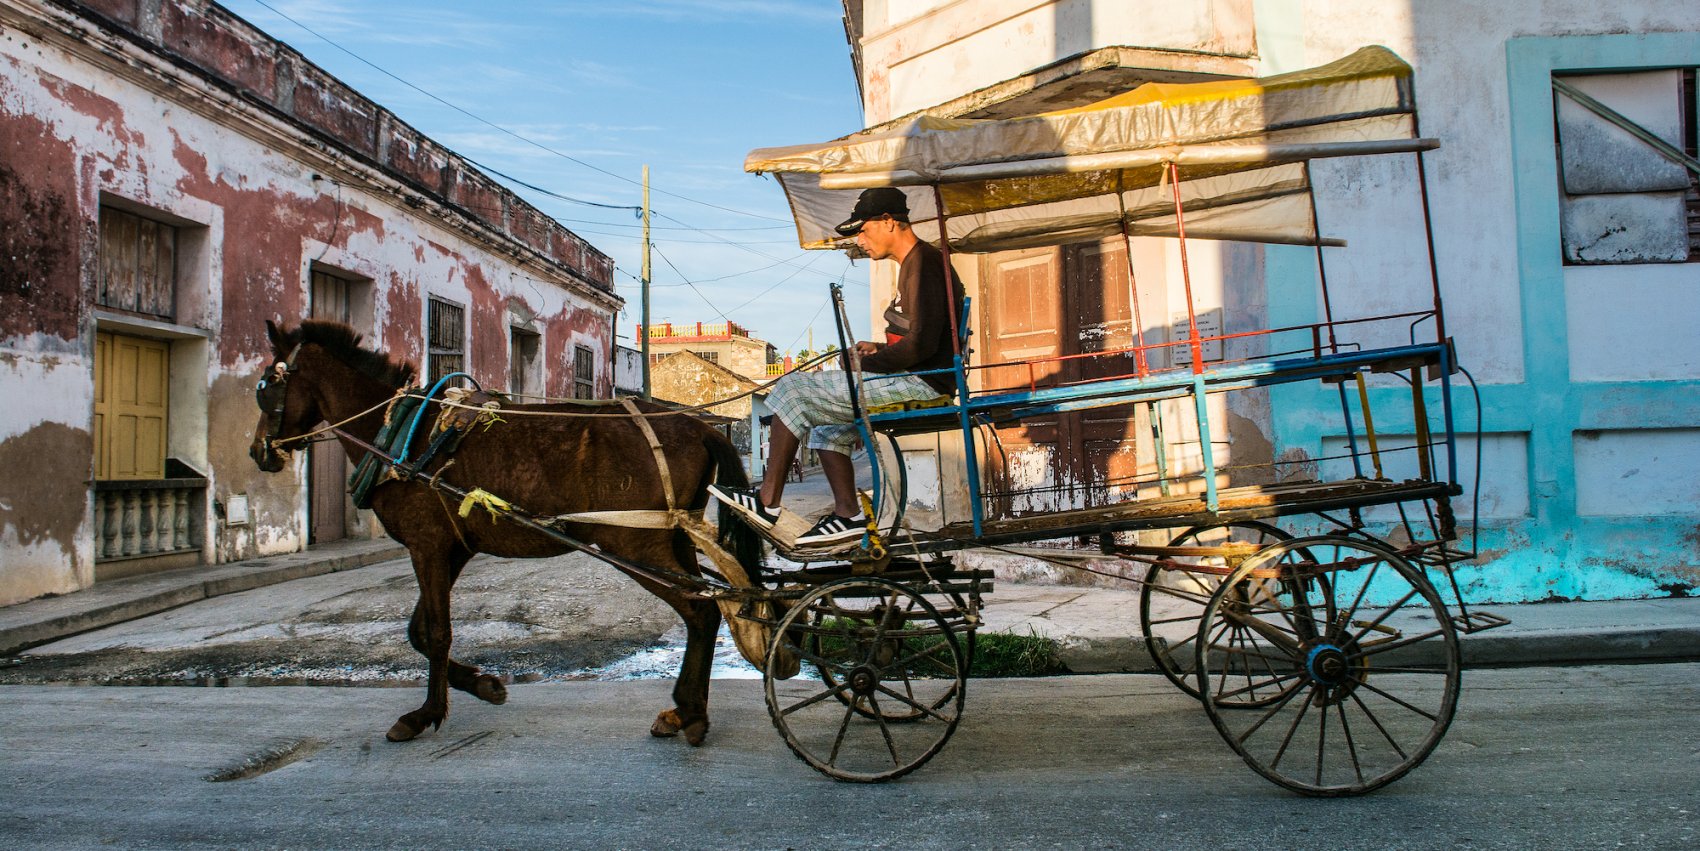 A classic horse and carriage ride in Gamagüey, Cuba